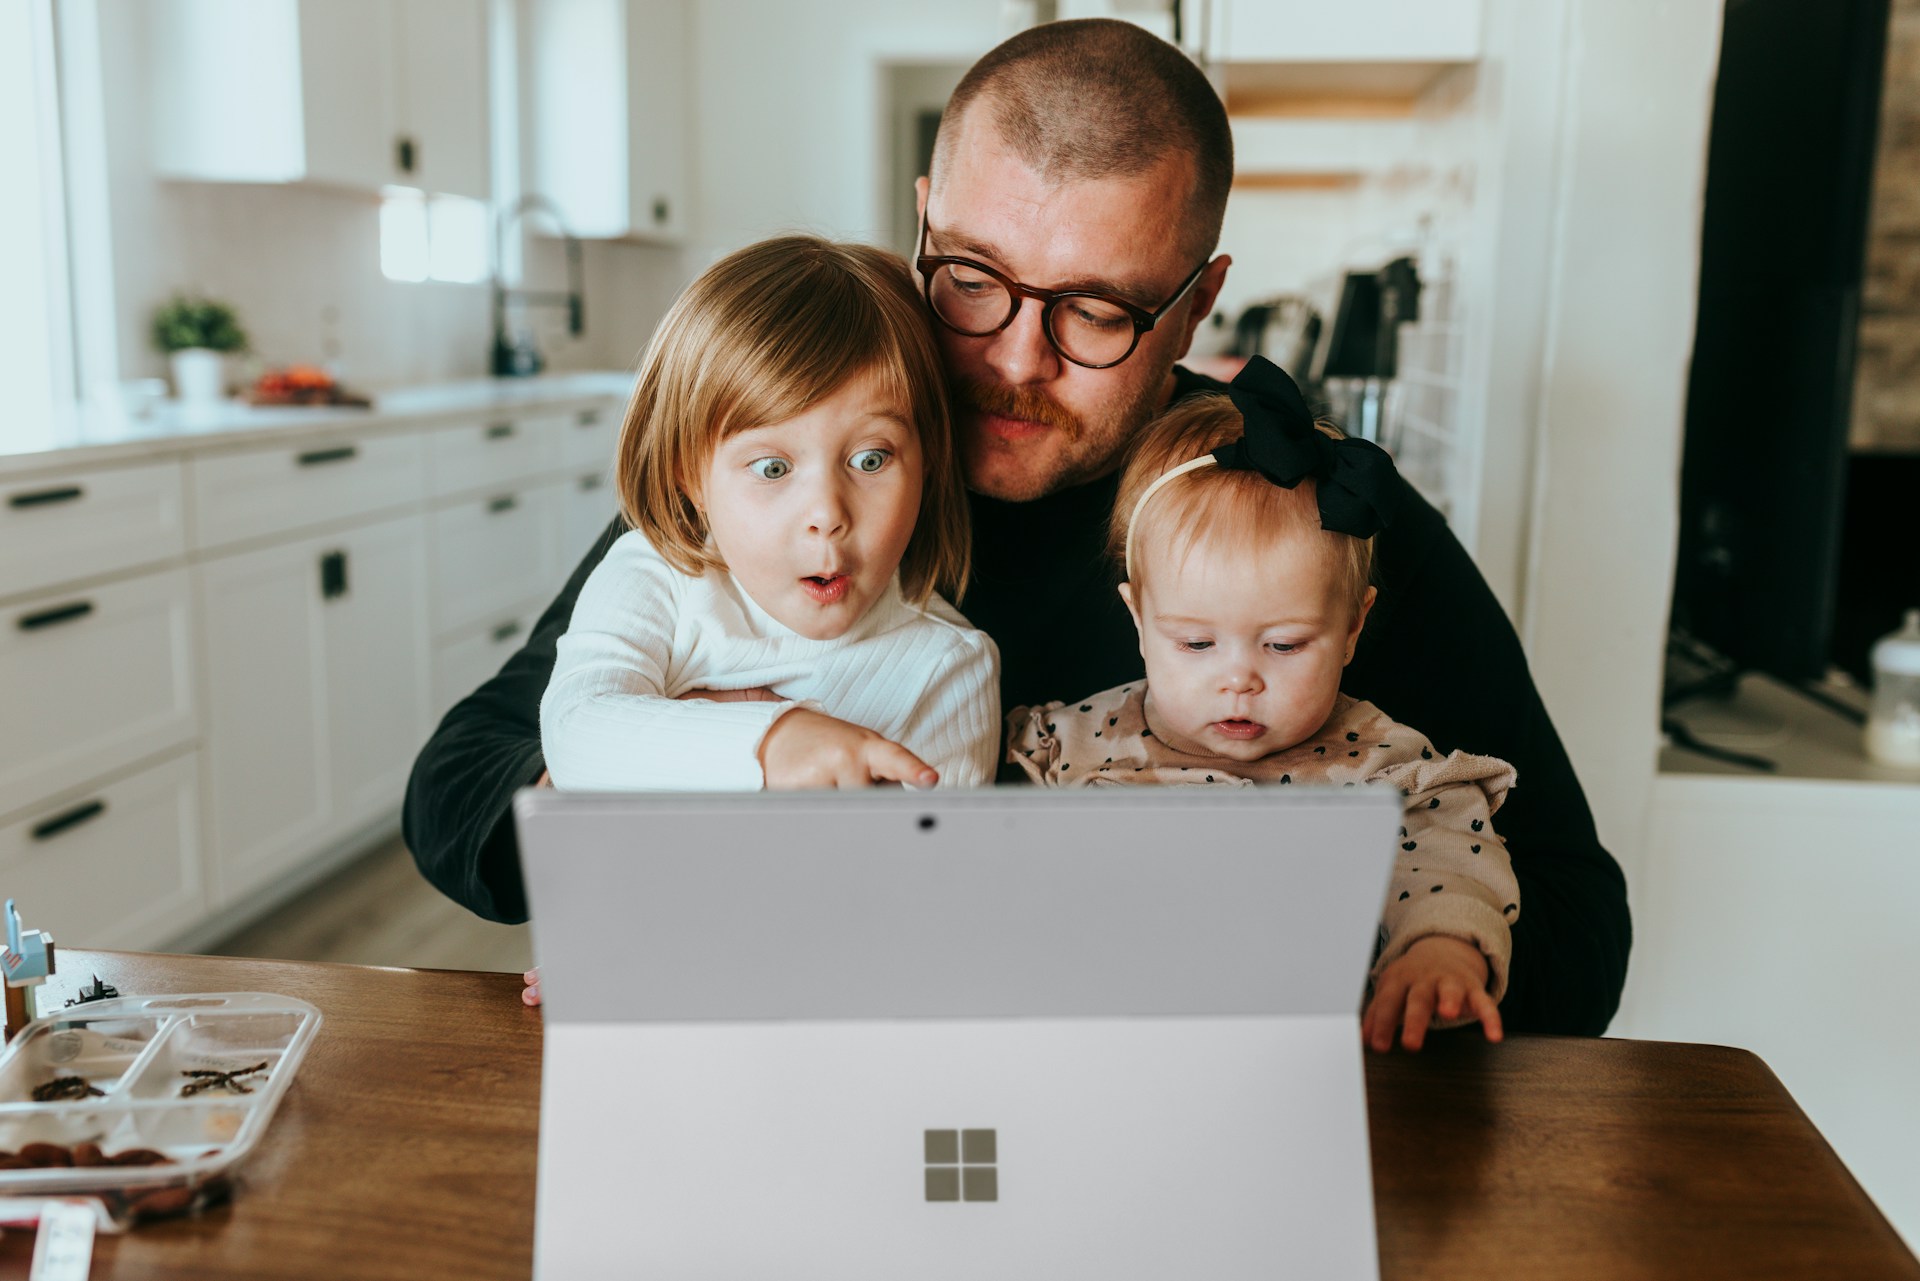 Professional relocation guide: A father and his two children using the computer